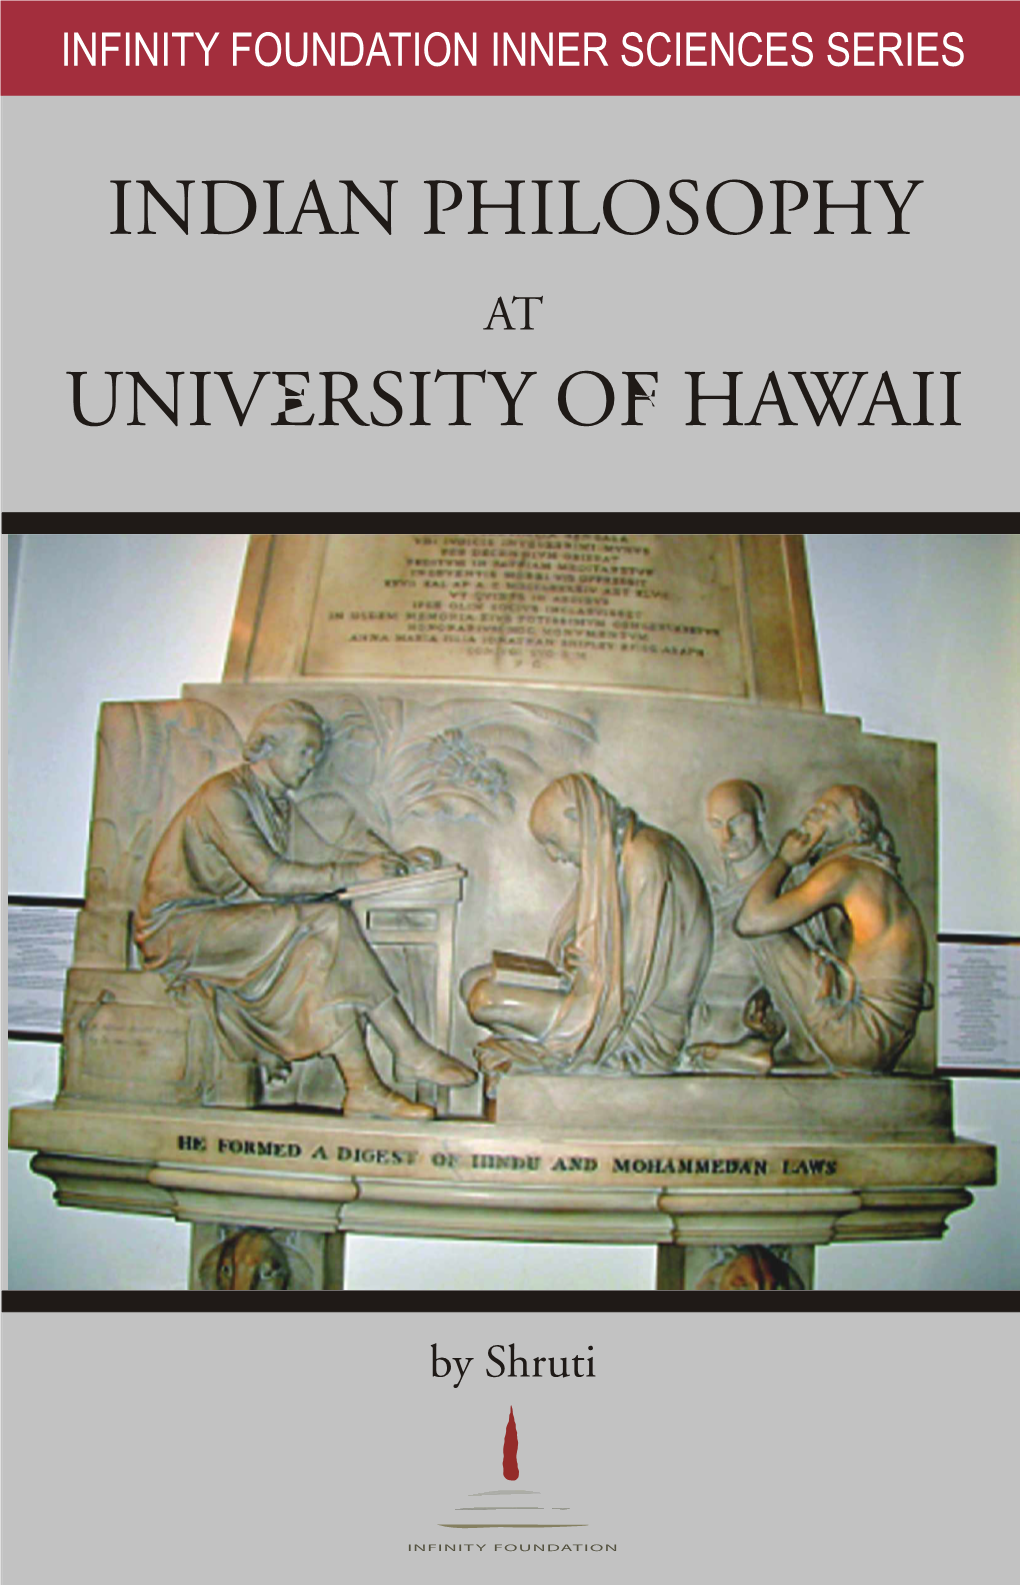 Indian Philosophy at University of Hawaii by Shruti